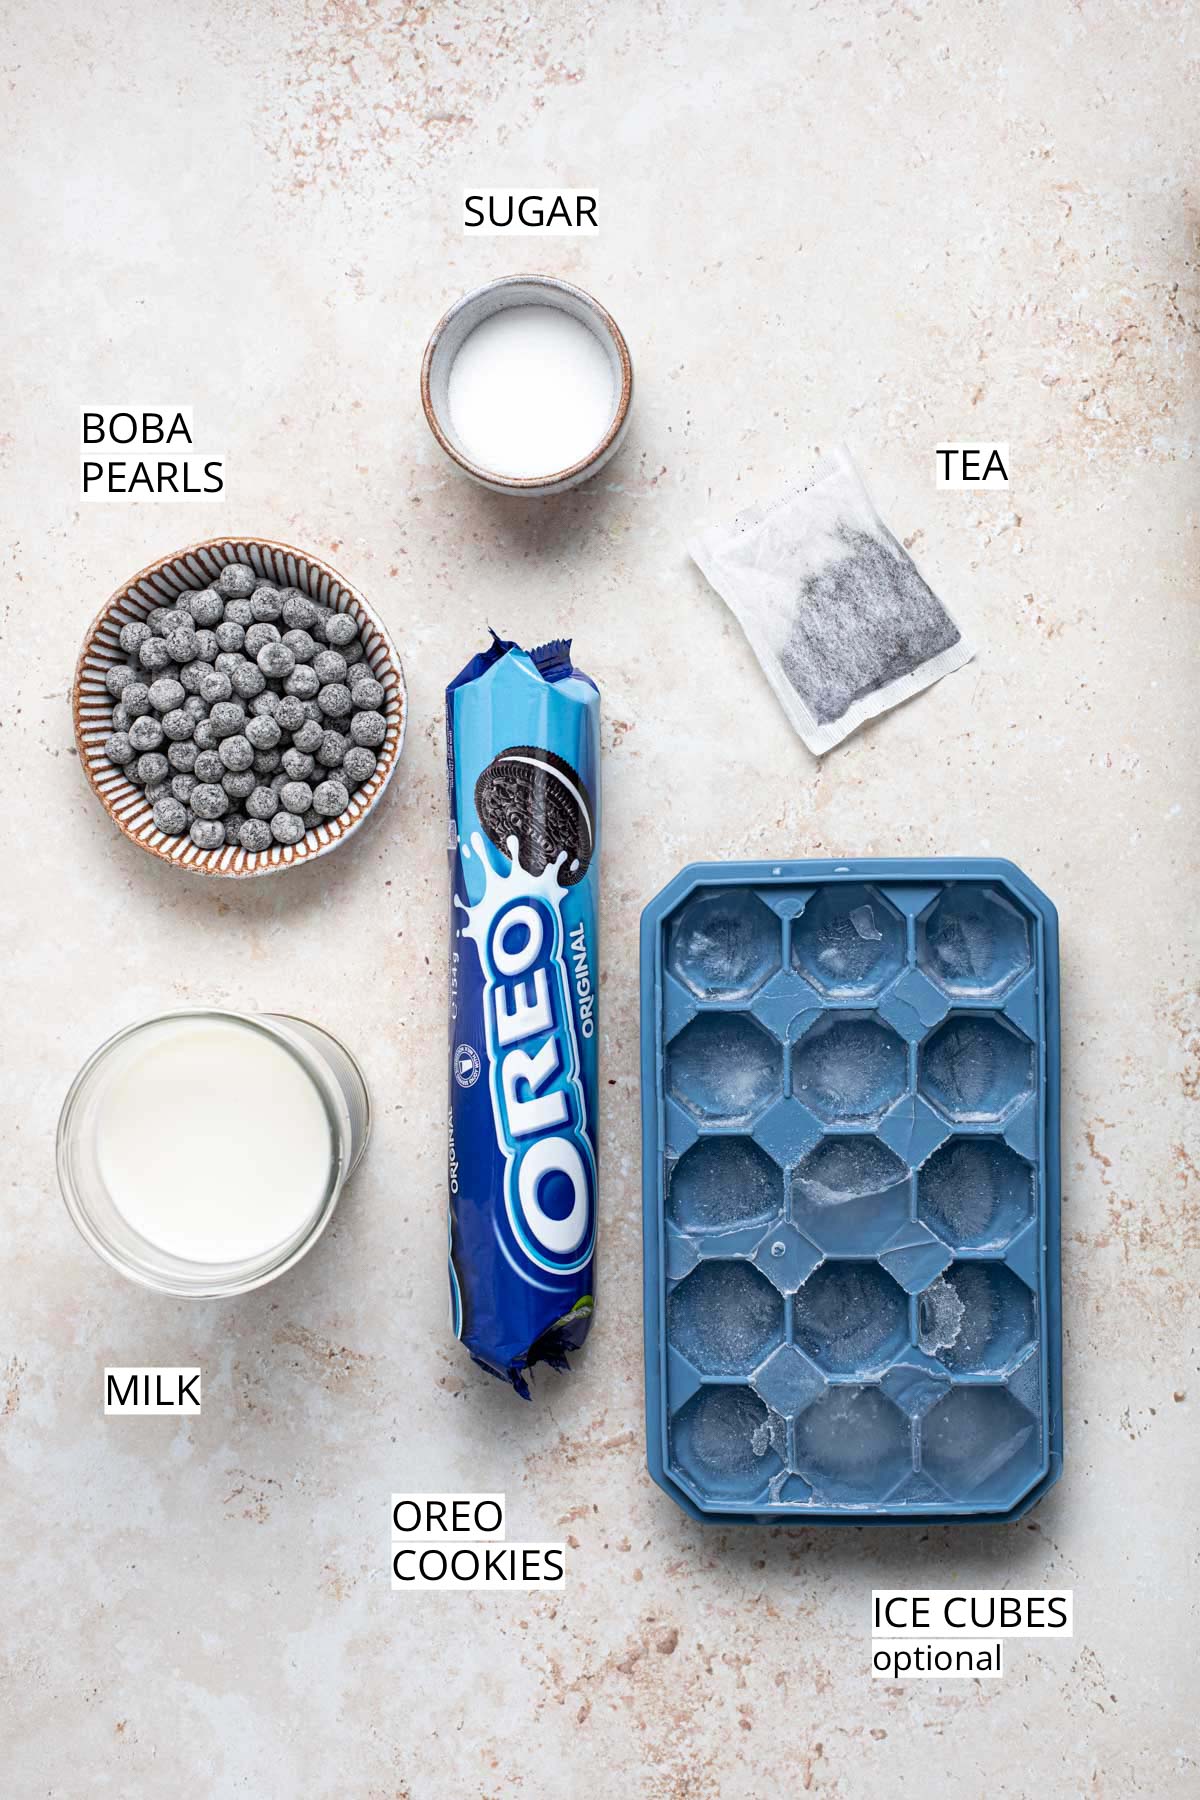 All ingredients needed to make oreo milk tea placed on a flat surface.